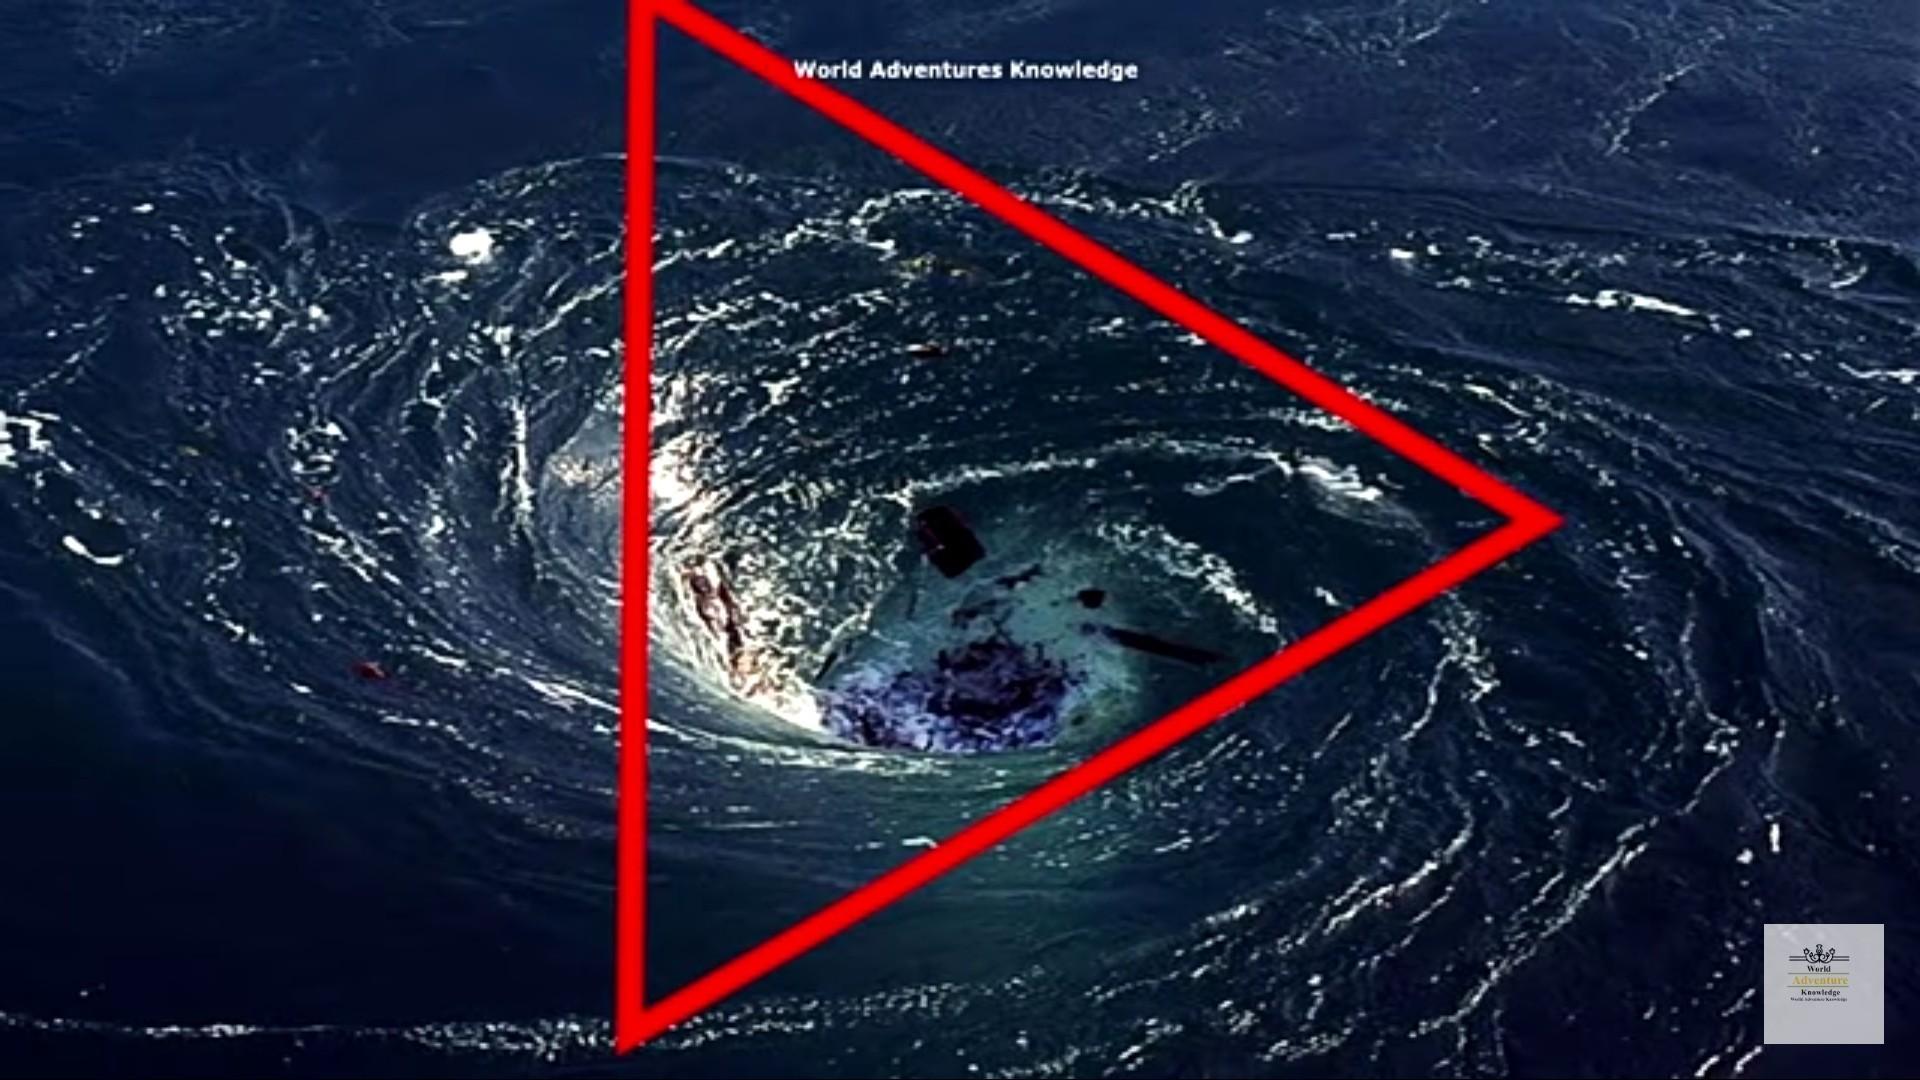 Why the Bermuda triangle is called Bermuda triangle and why people